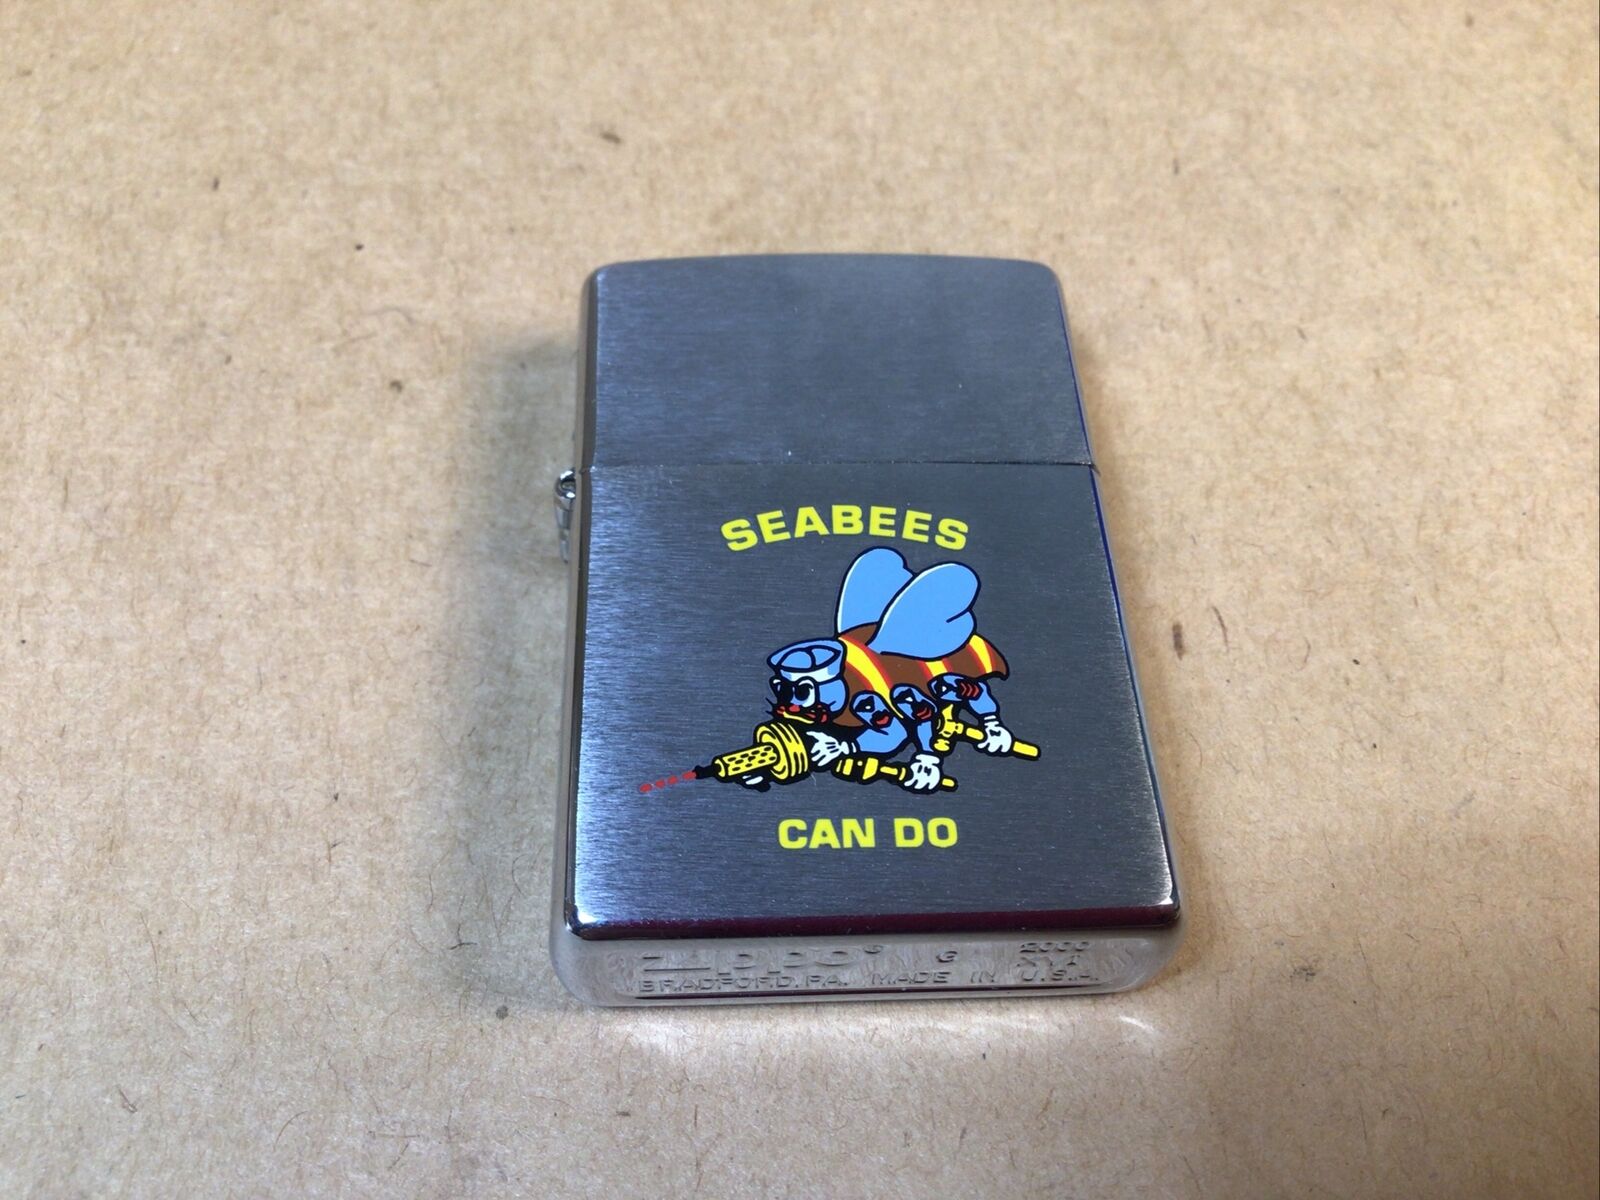 Unfired  SEABEES CAN DO Collectors Zippo Lighter G 2000 XVI